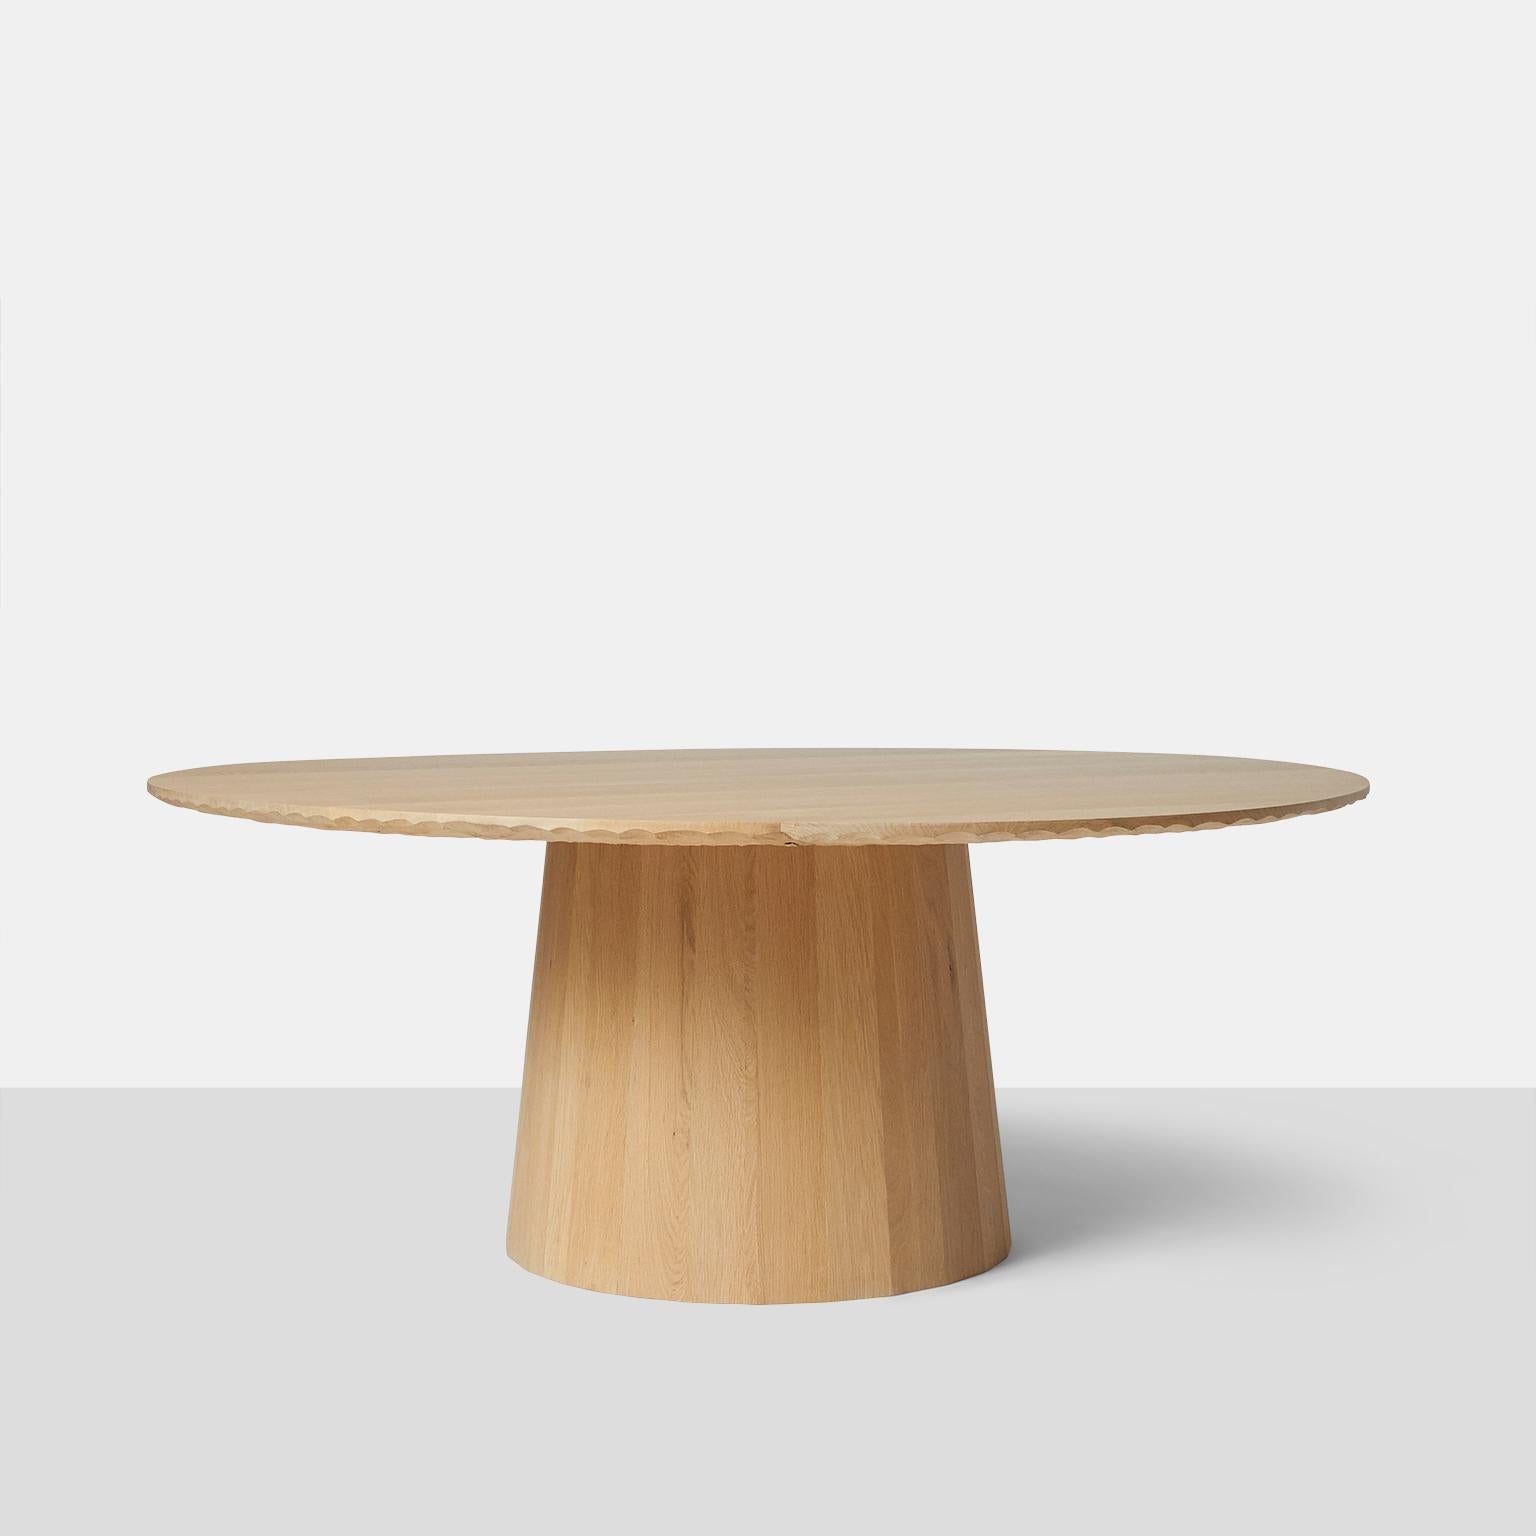 Oak dining table by Kaspar Hamacher
A large round dining table in oak completely handmade with hand scraped detail on edge and underside of tabletop. The base is made with wide planks and in a circular shape. Table will accommodate 10